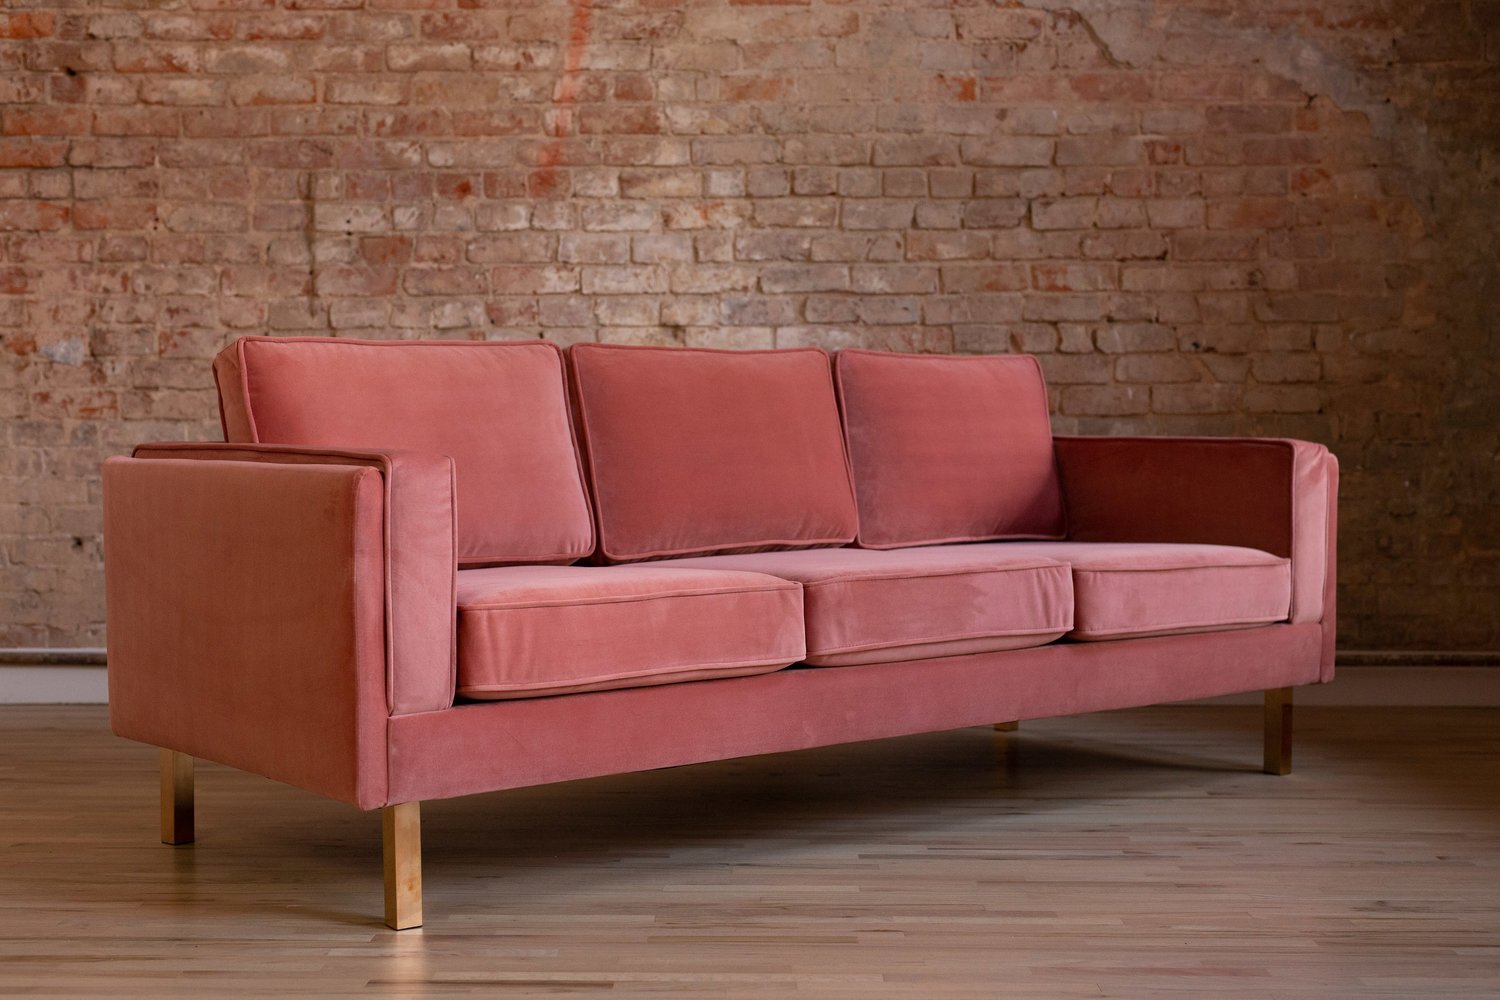  Edloe Finch 3 Seater Sofa Sofas and Loveseat Fabric color: Blush pink velvet Contemporary